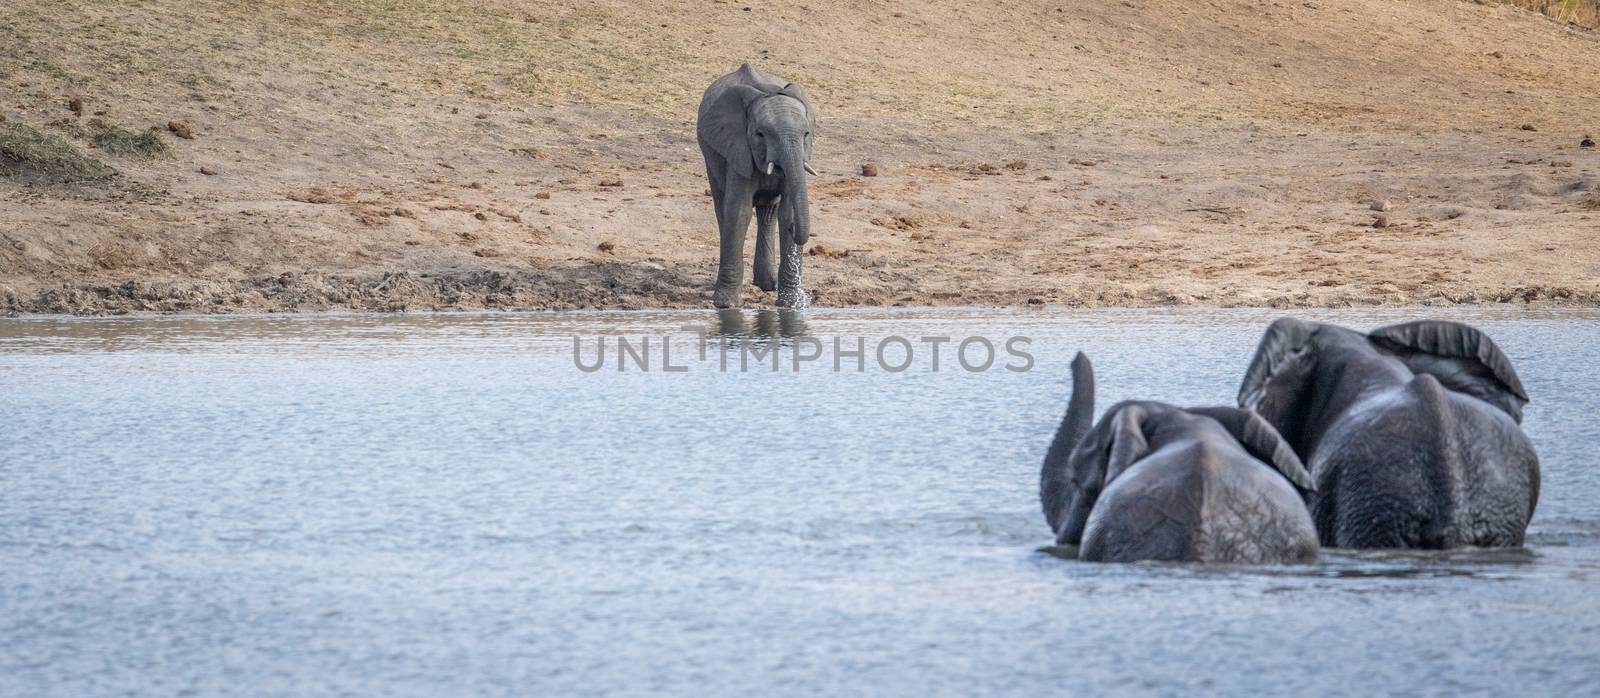 Three Elephants at a dam in the Kruger National Park, South Africa.